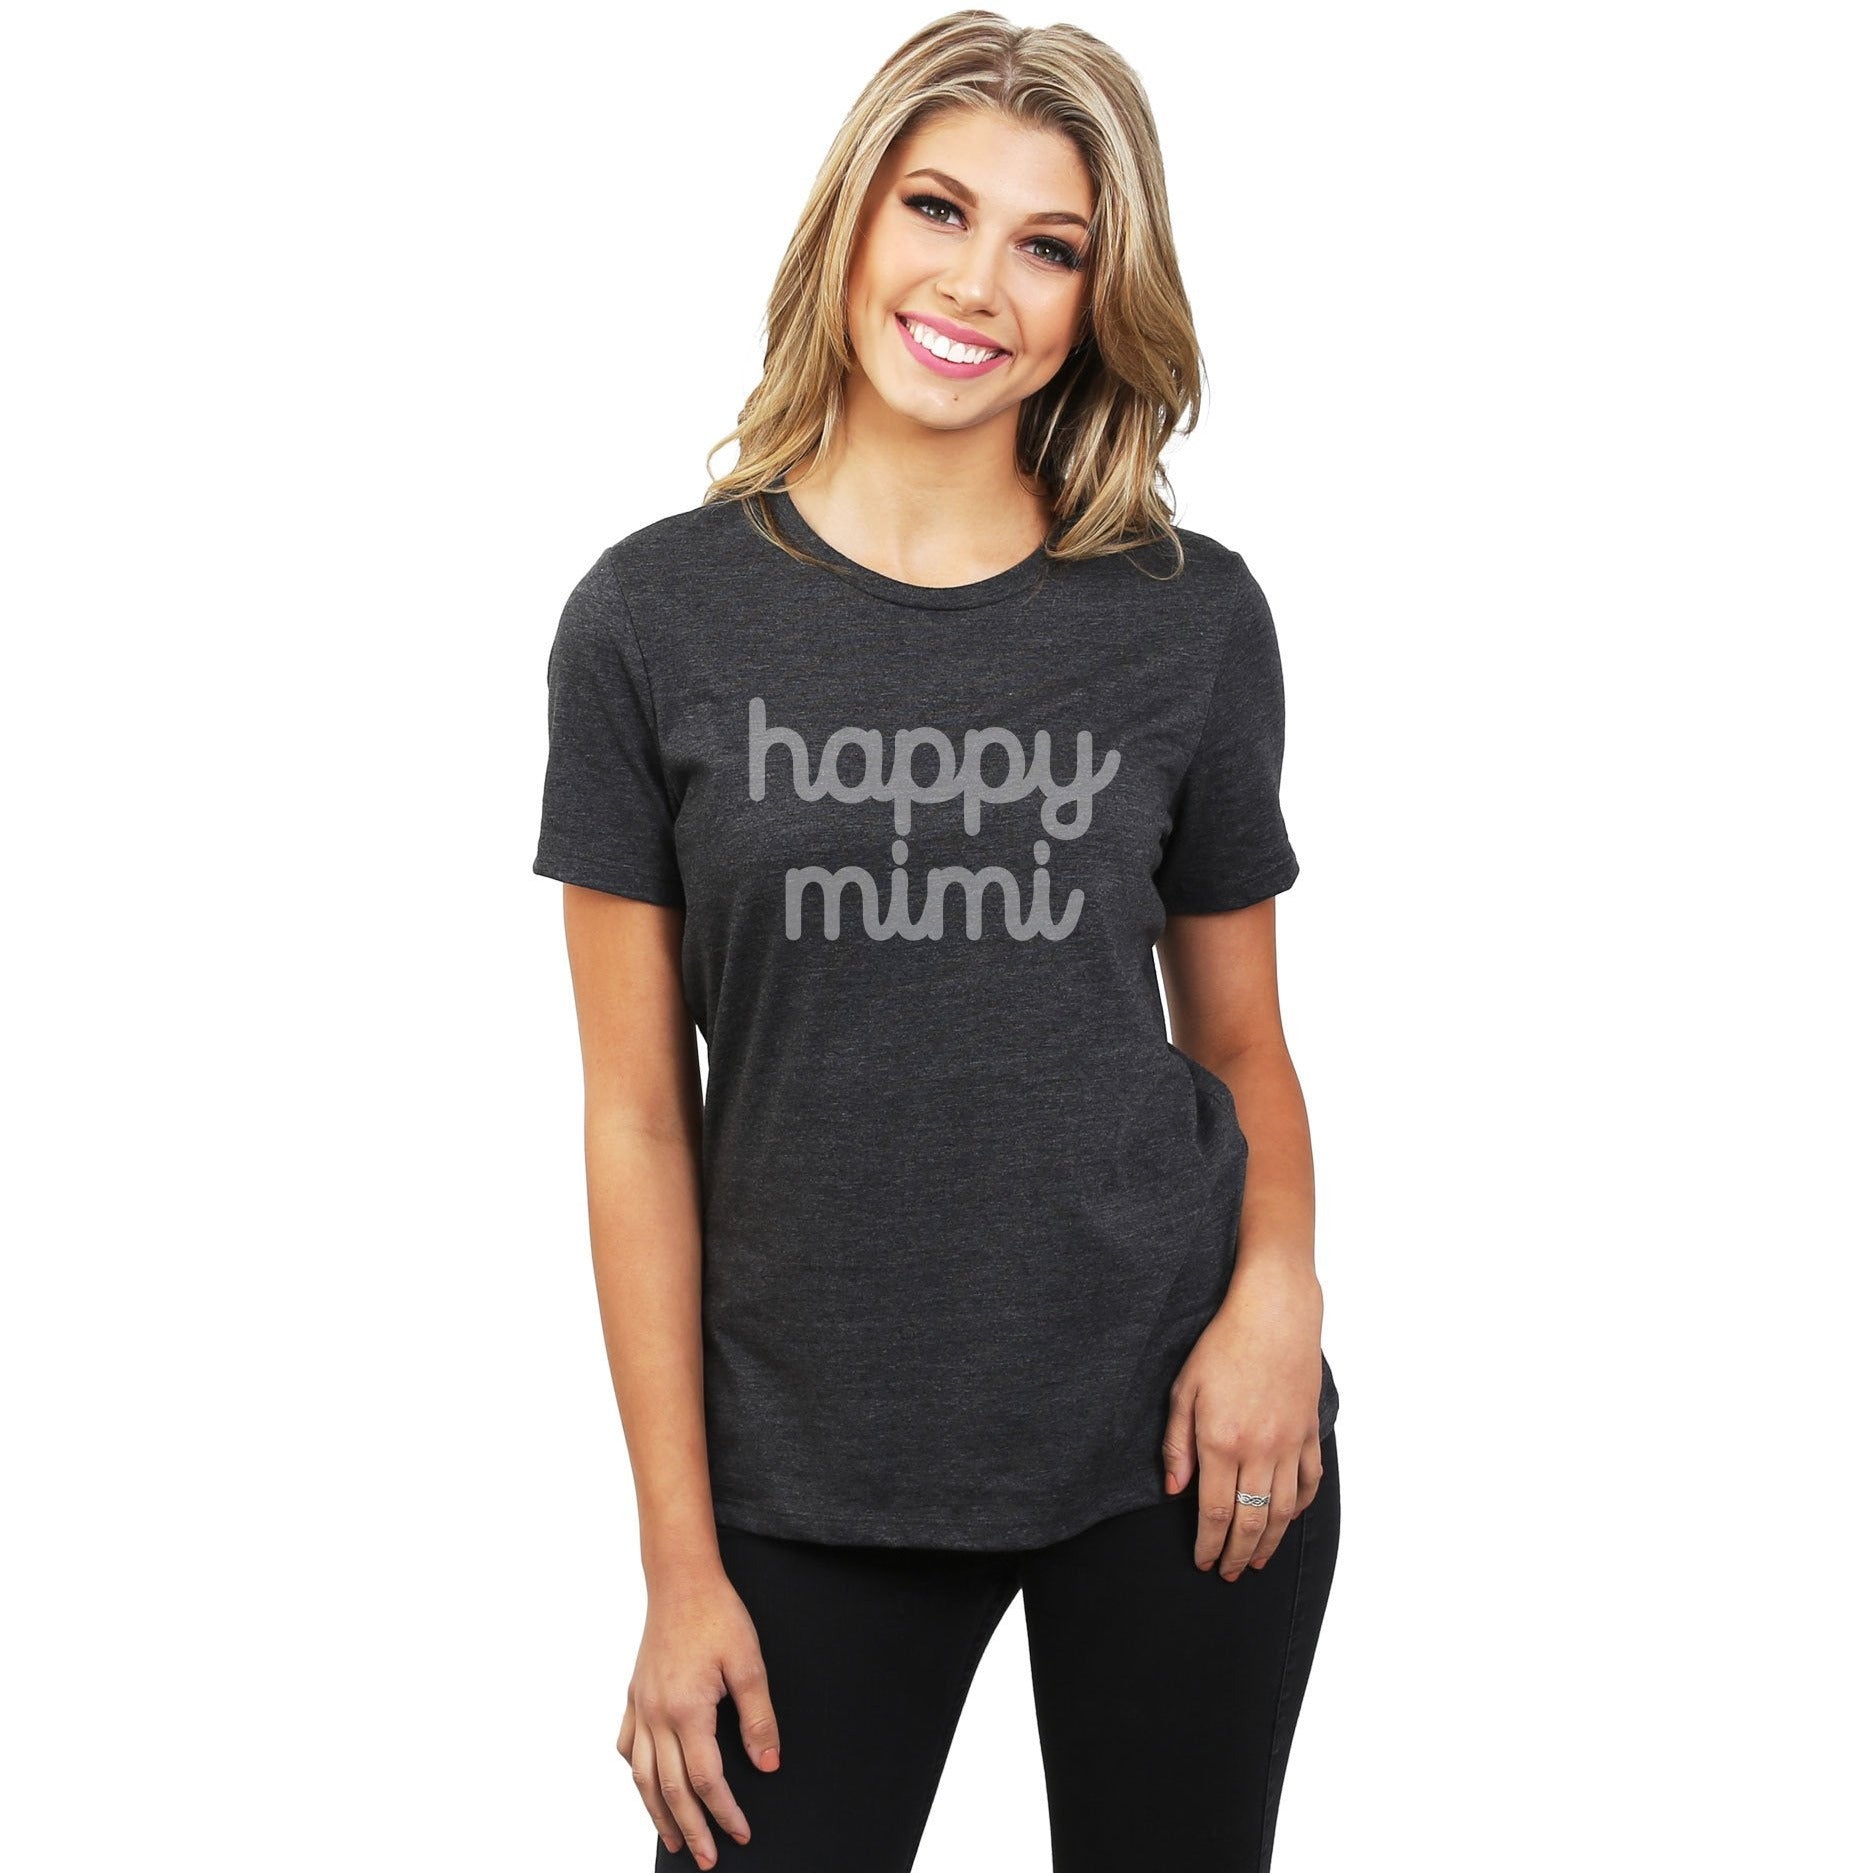 Happy Mimi Women's Relaxed Crewneck T-Shirt Top Tee Charcoal Model
